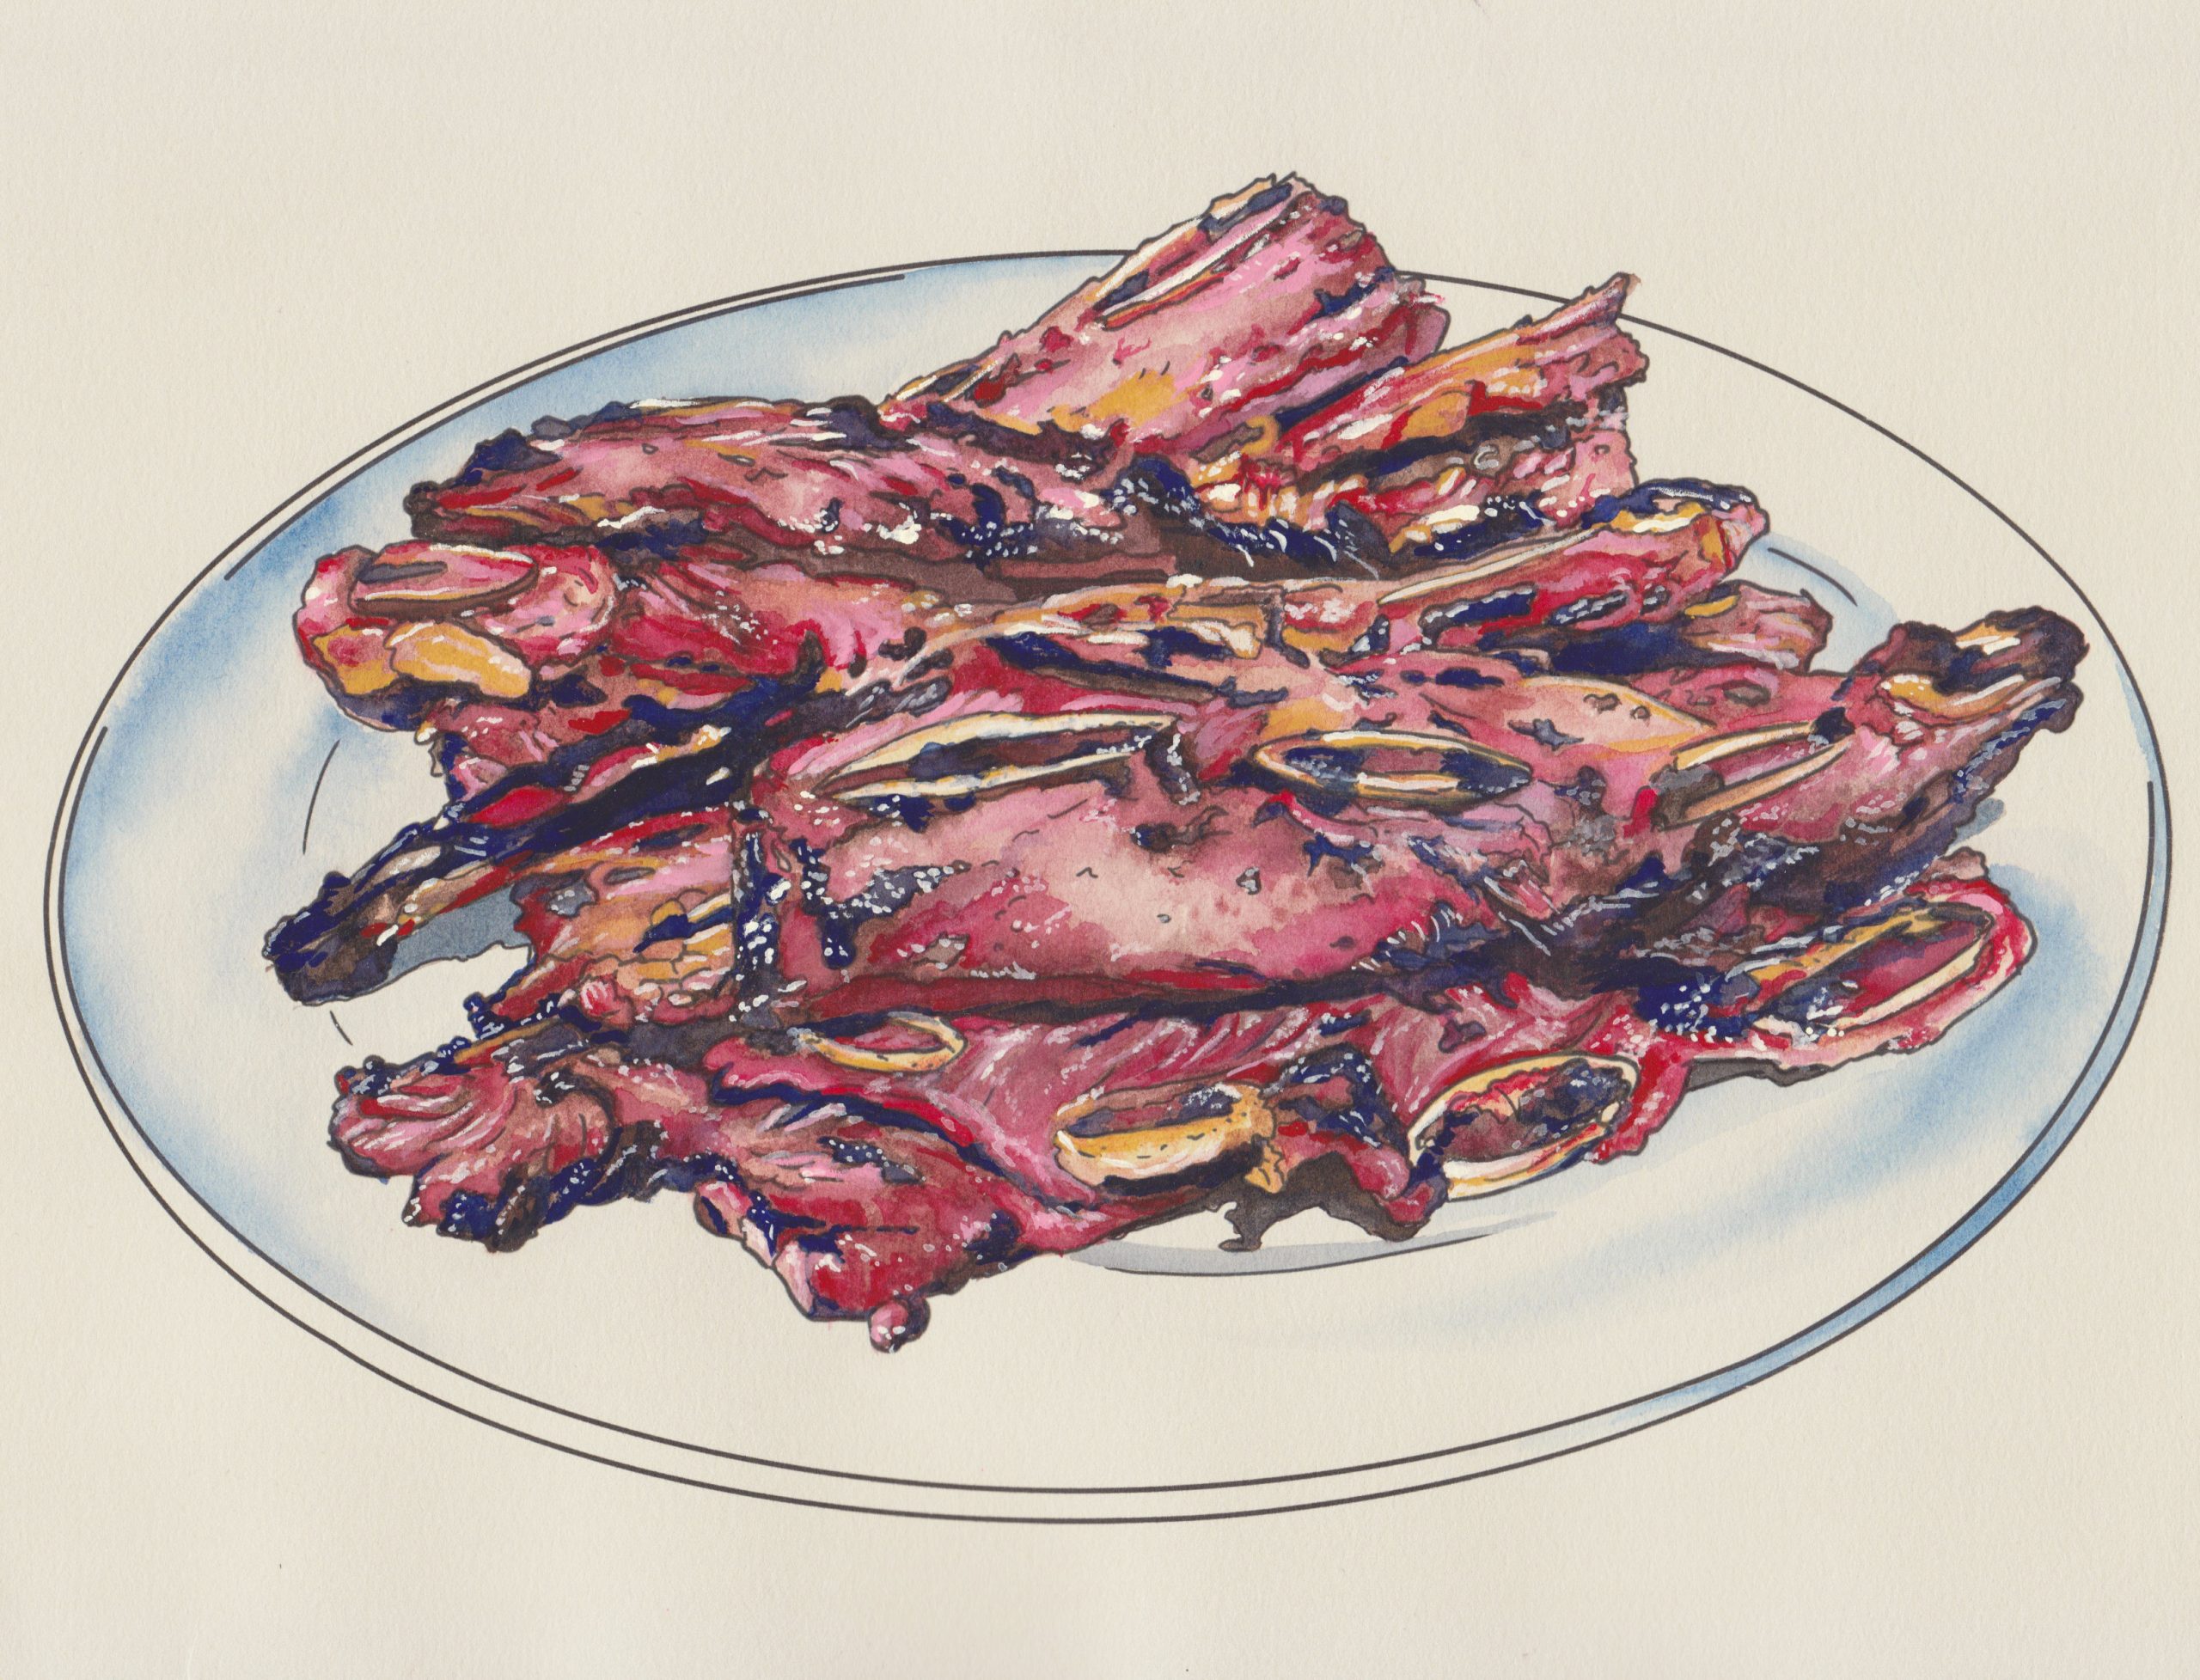 A pile of grilled kalbi is stacked on a round white plate against a white background in this hand-painted digital illustration. Glistening meat is rendered in pinks and reds with blackened crispy bits between long oval-shaped cross-sections of the beef short rib bones.